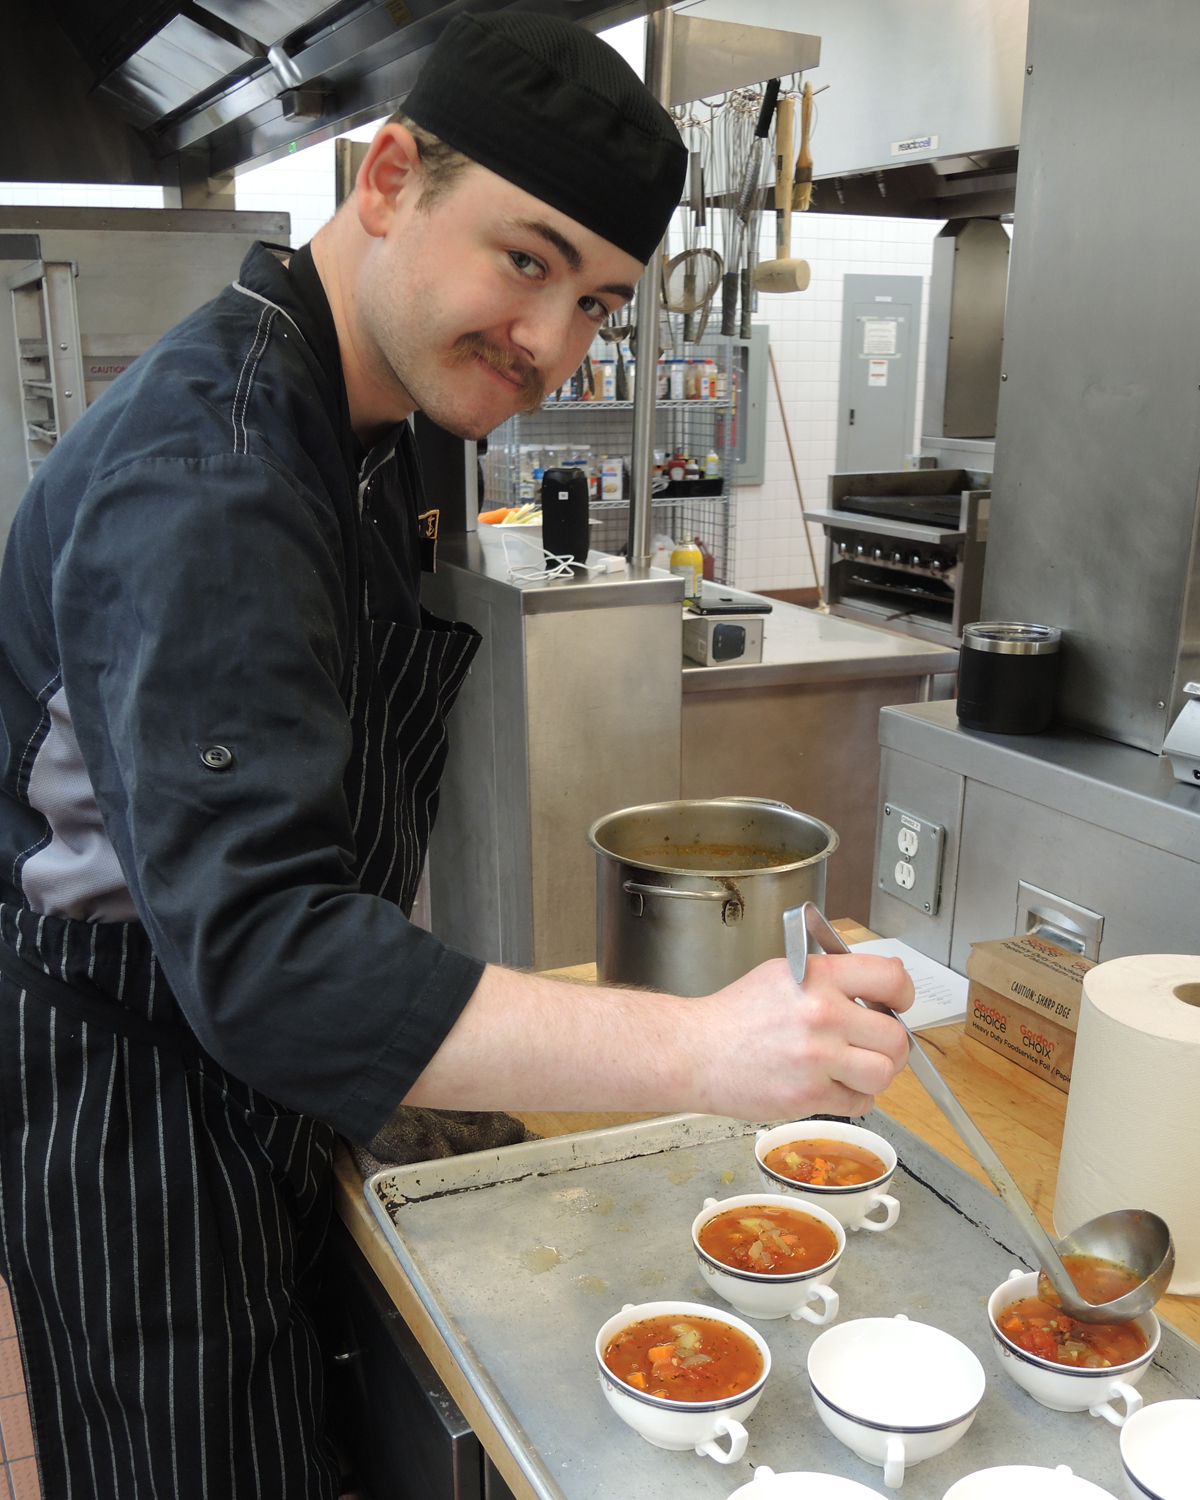 Sailor 2nd Class Trey Pennington, military cook-in-training, prepares dishes for his Confirmation Dinner.